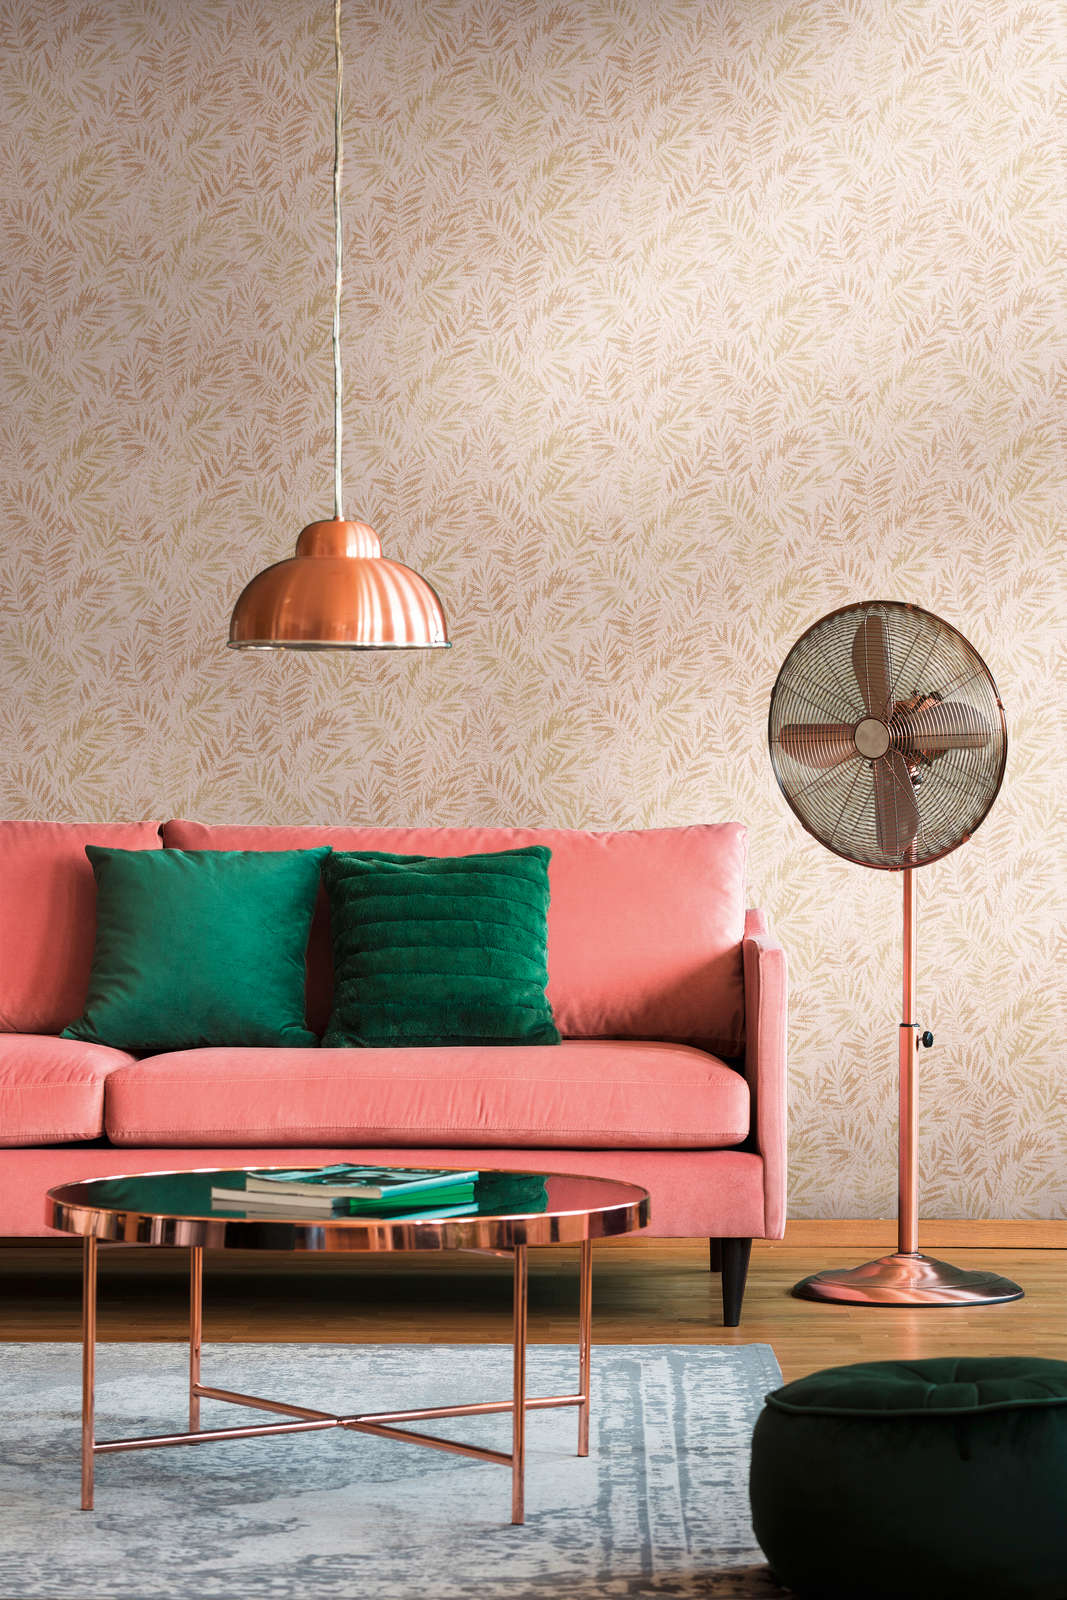             Leaf pattern non-woven wallpaper with gloss effect - pink, gold
        